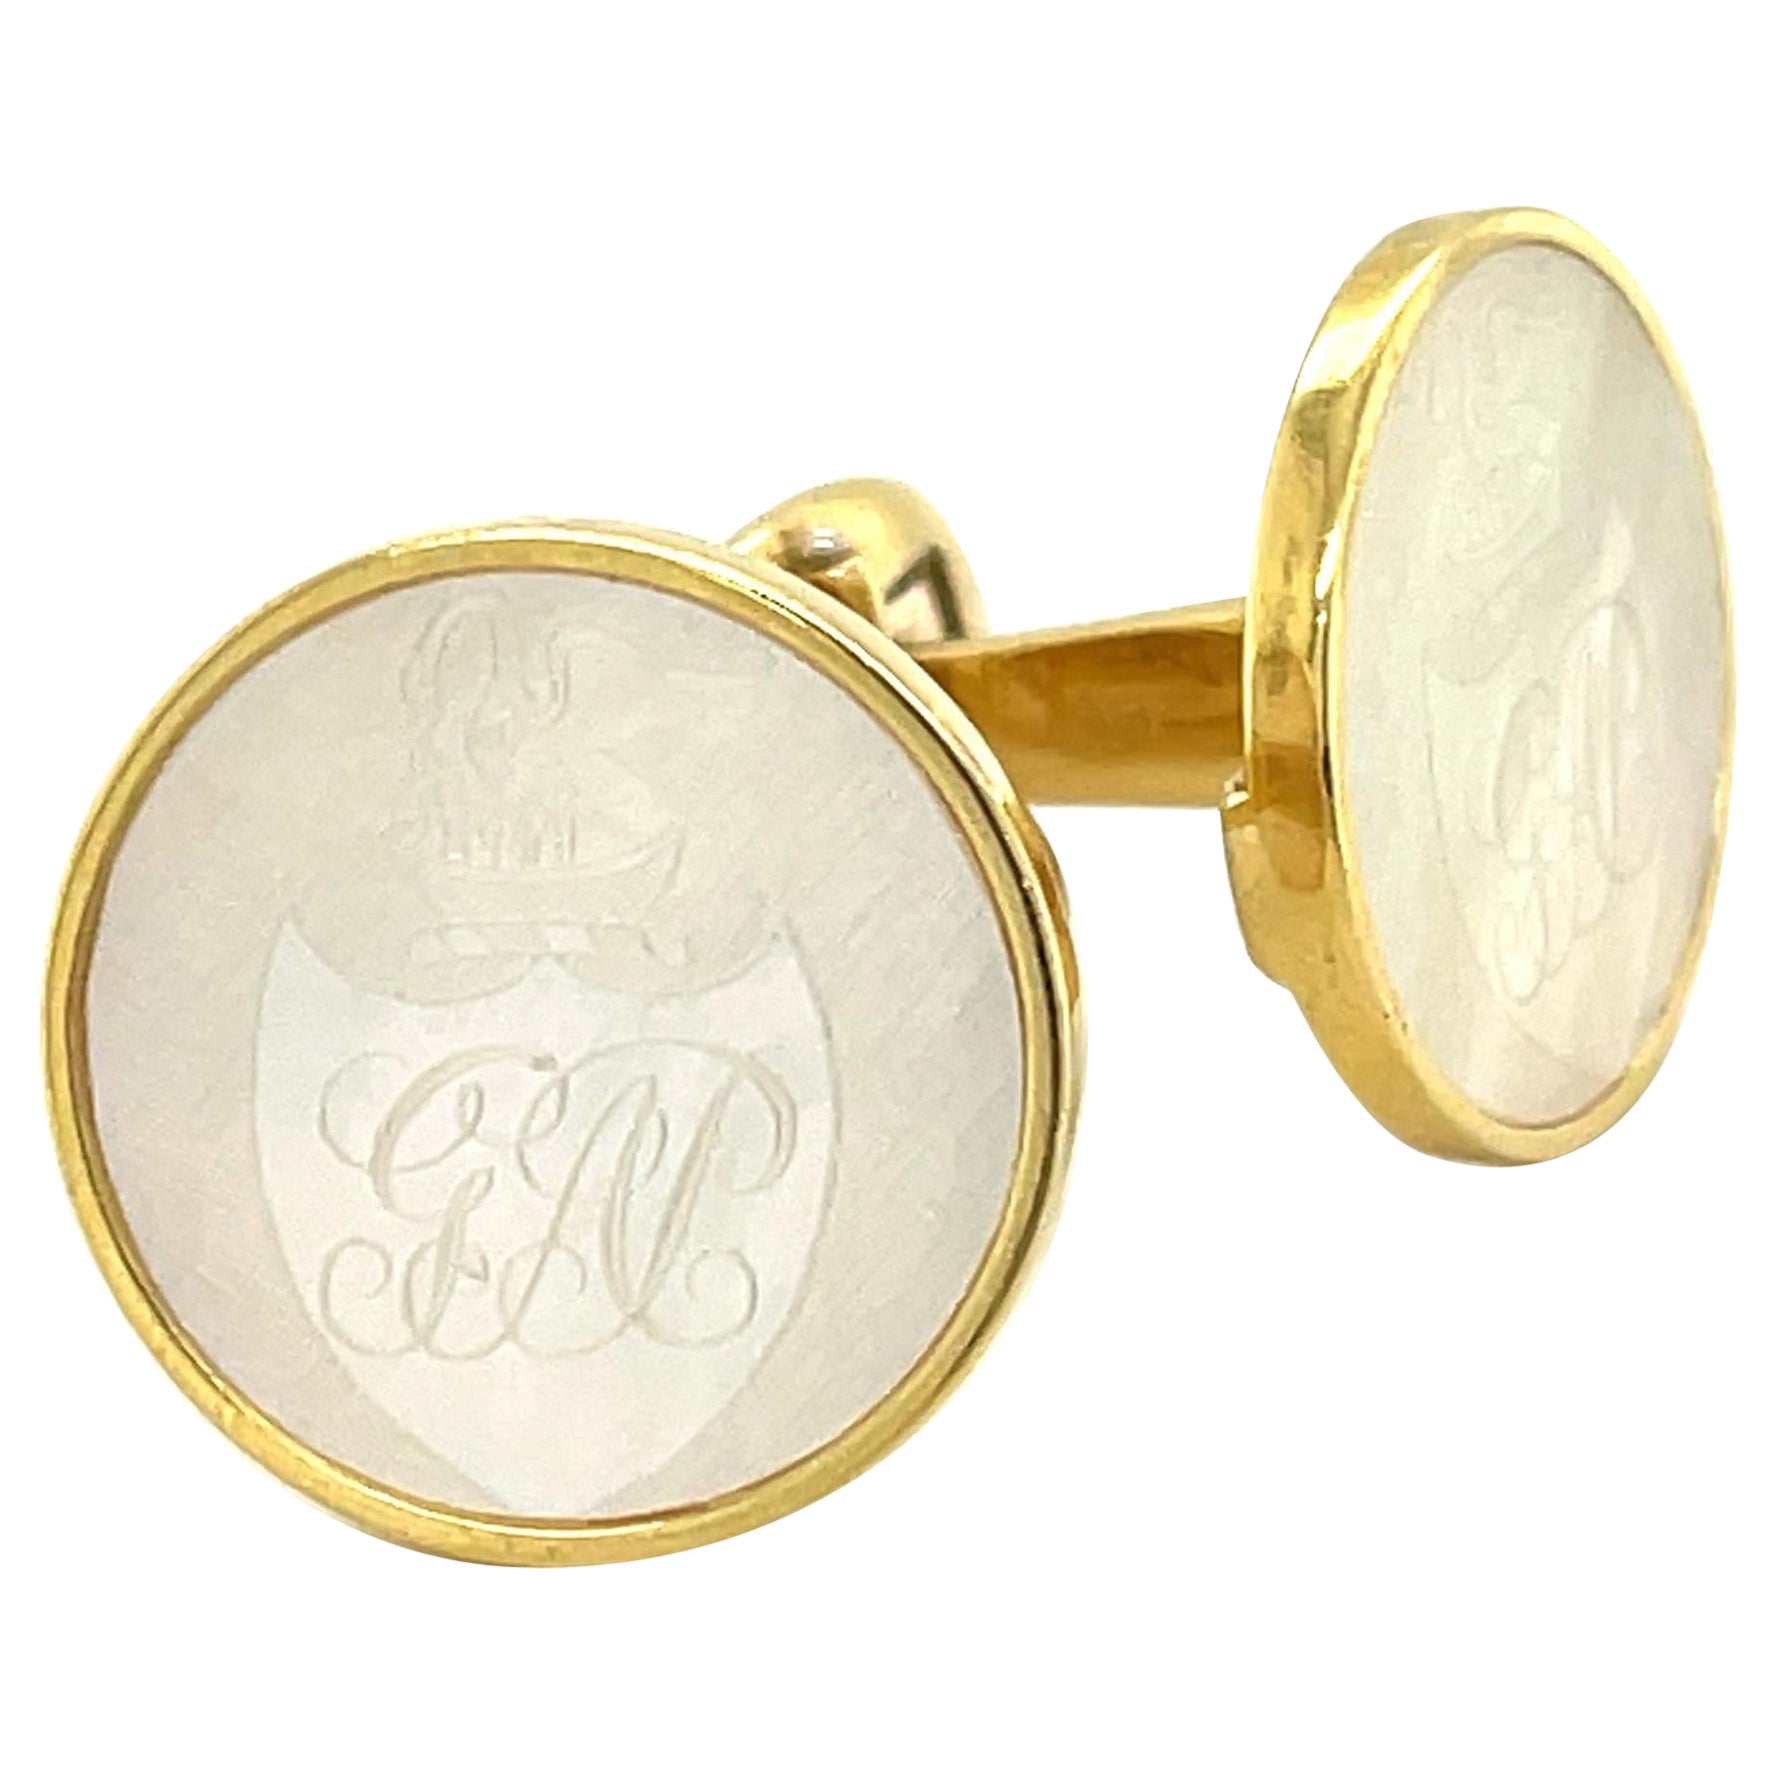 Antique Mother-of-Pearl Gaming Counter Cufflinks in 18k Yellow Gold